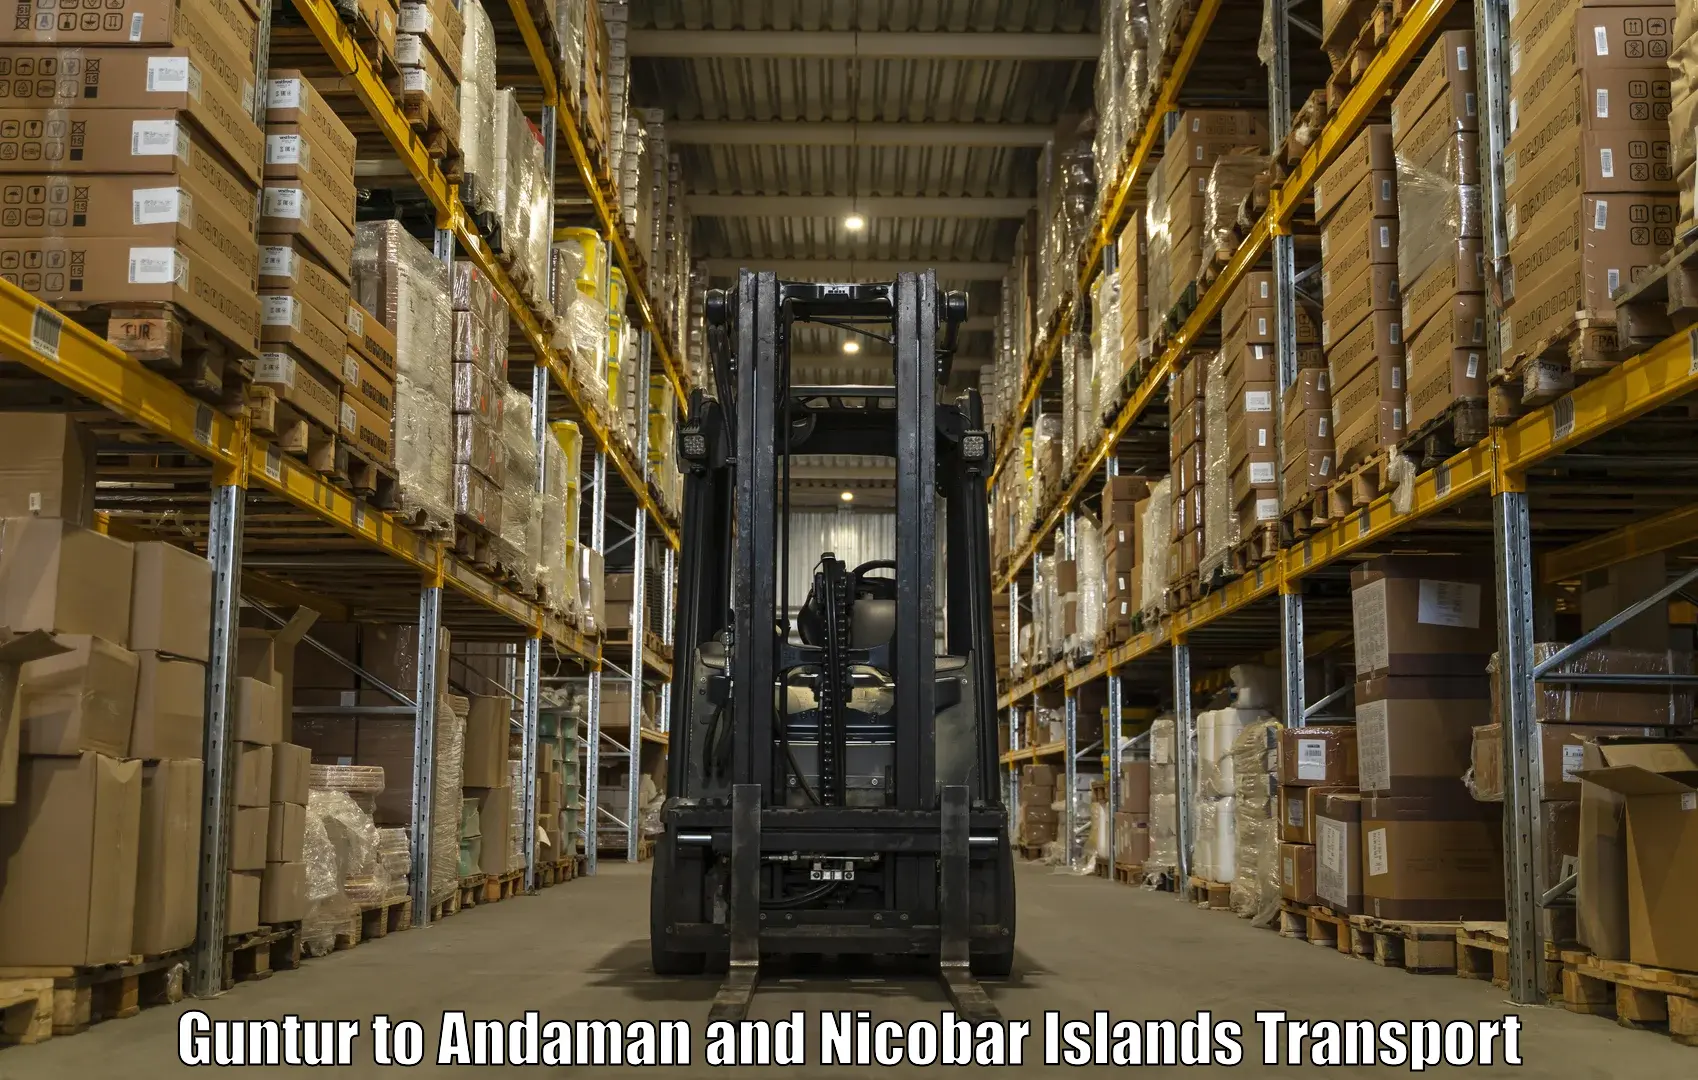 Air freight transport services in Guntur to Andaman and Nicobar Islands